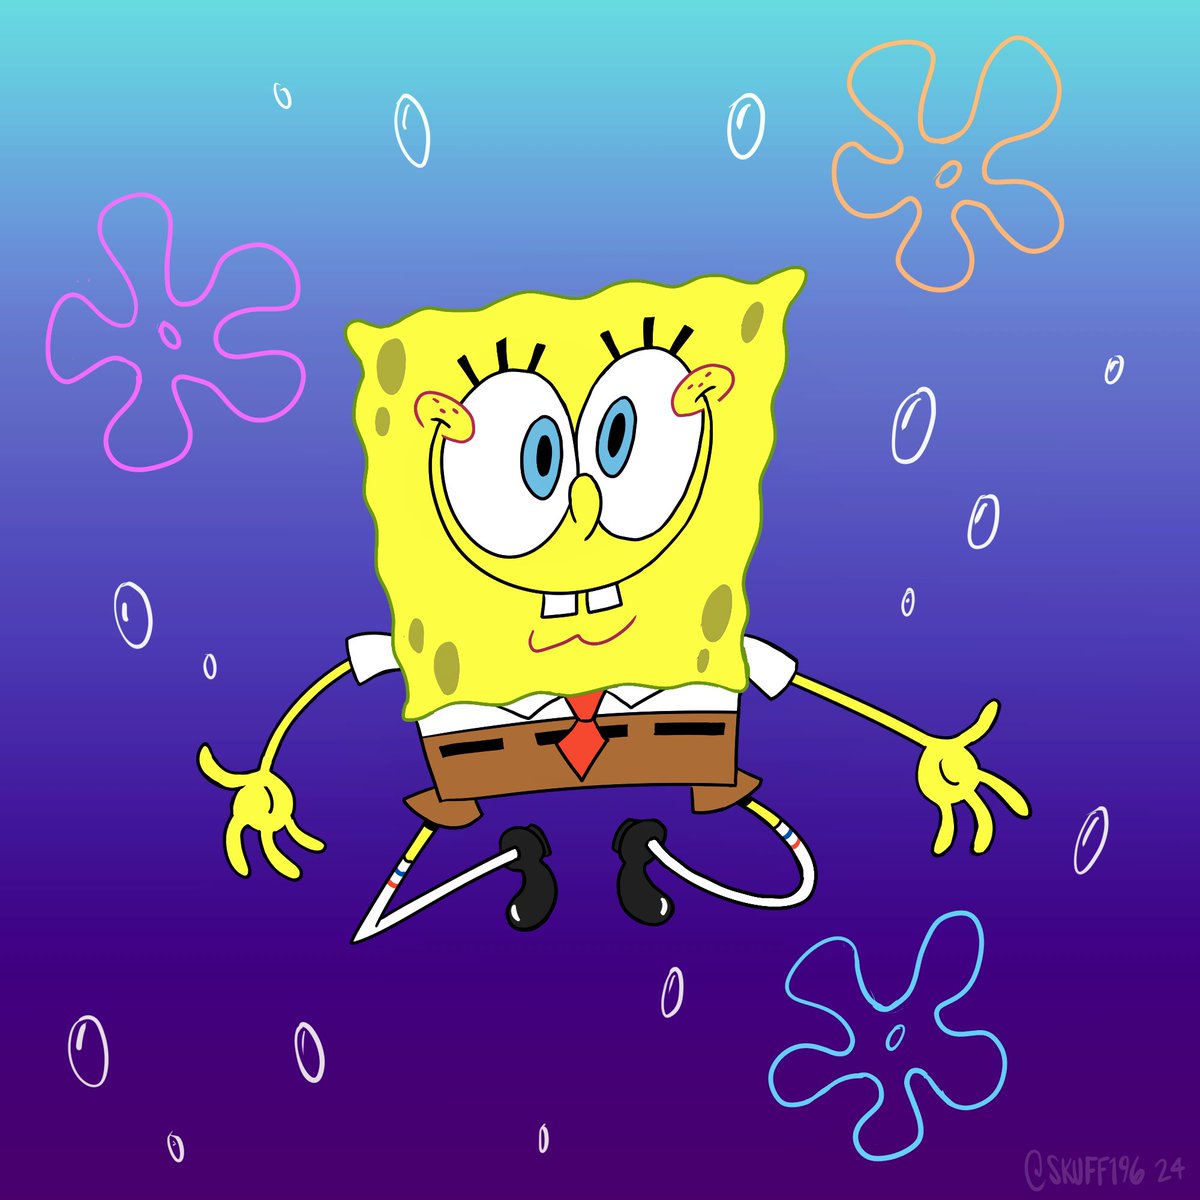 Happy 25th anniversary SpongeBob SquarePants! You love the world, and the world loves you back! 💛 Thanks for being with me my whole life! (Can you see the 25 in his limbs?)